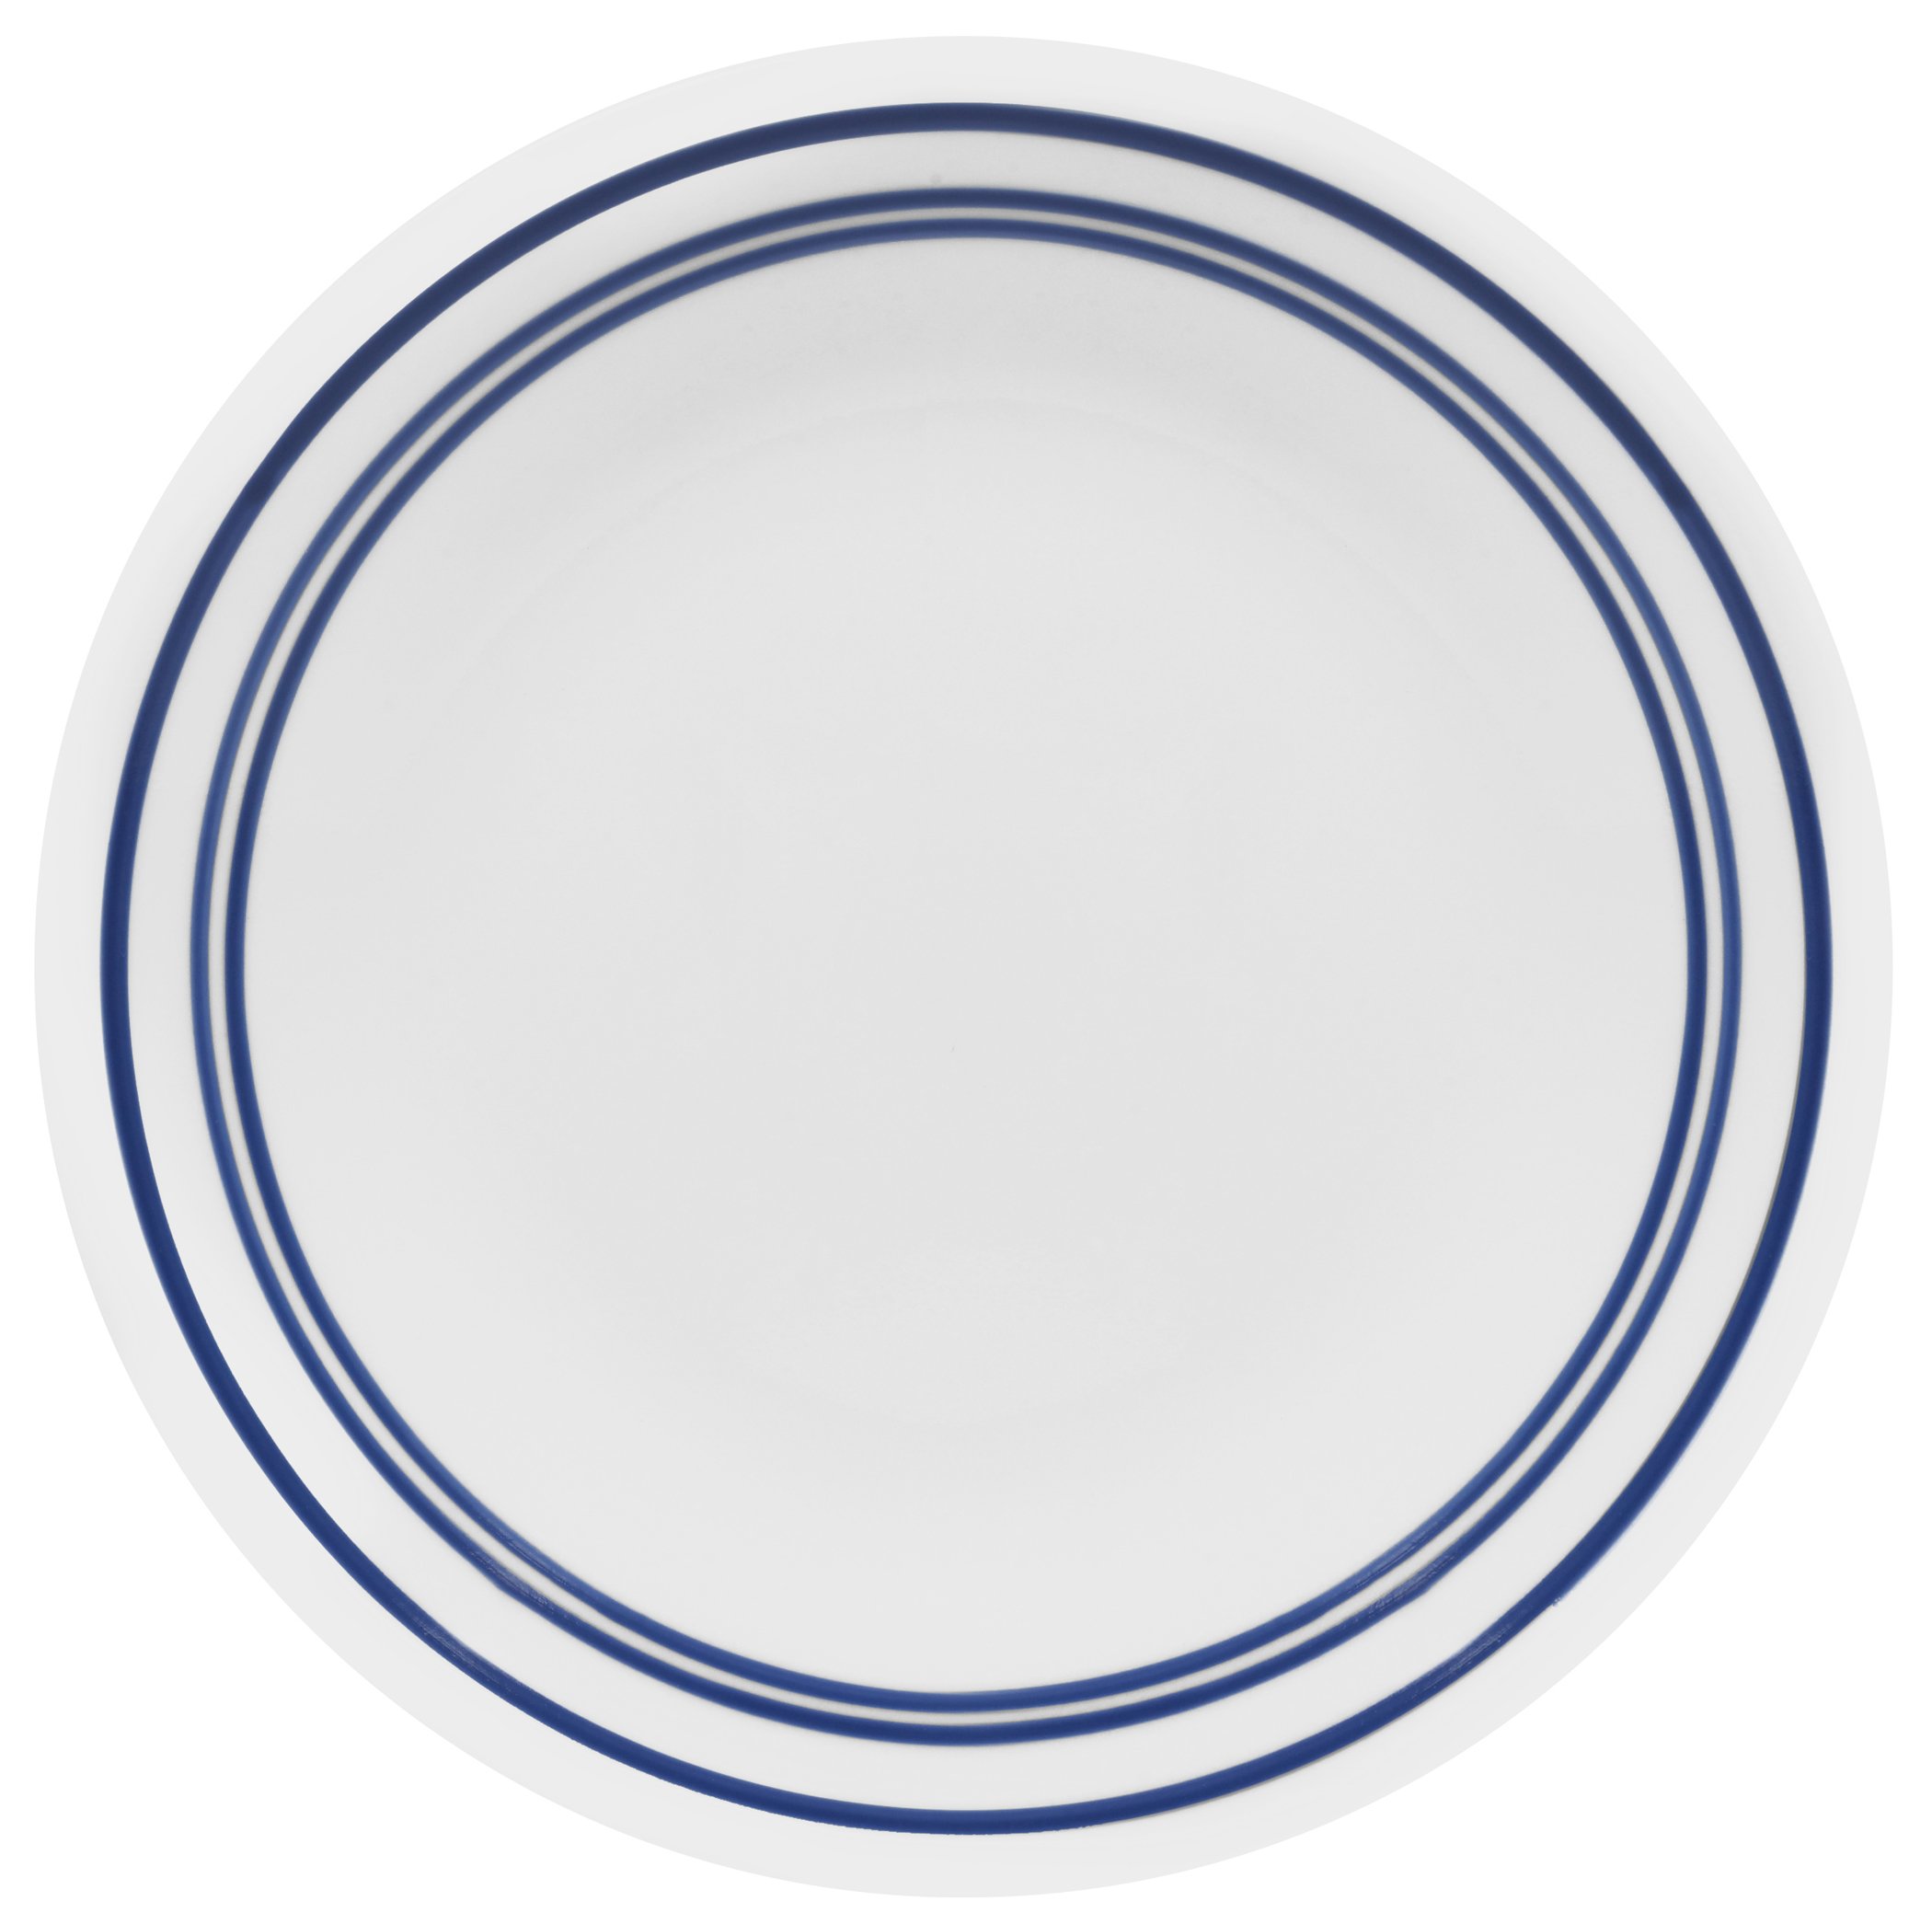 Corelle Livingware 6-3/4-Inch Bread and Butter Plate, Classic Caf Blue